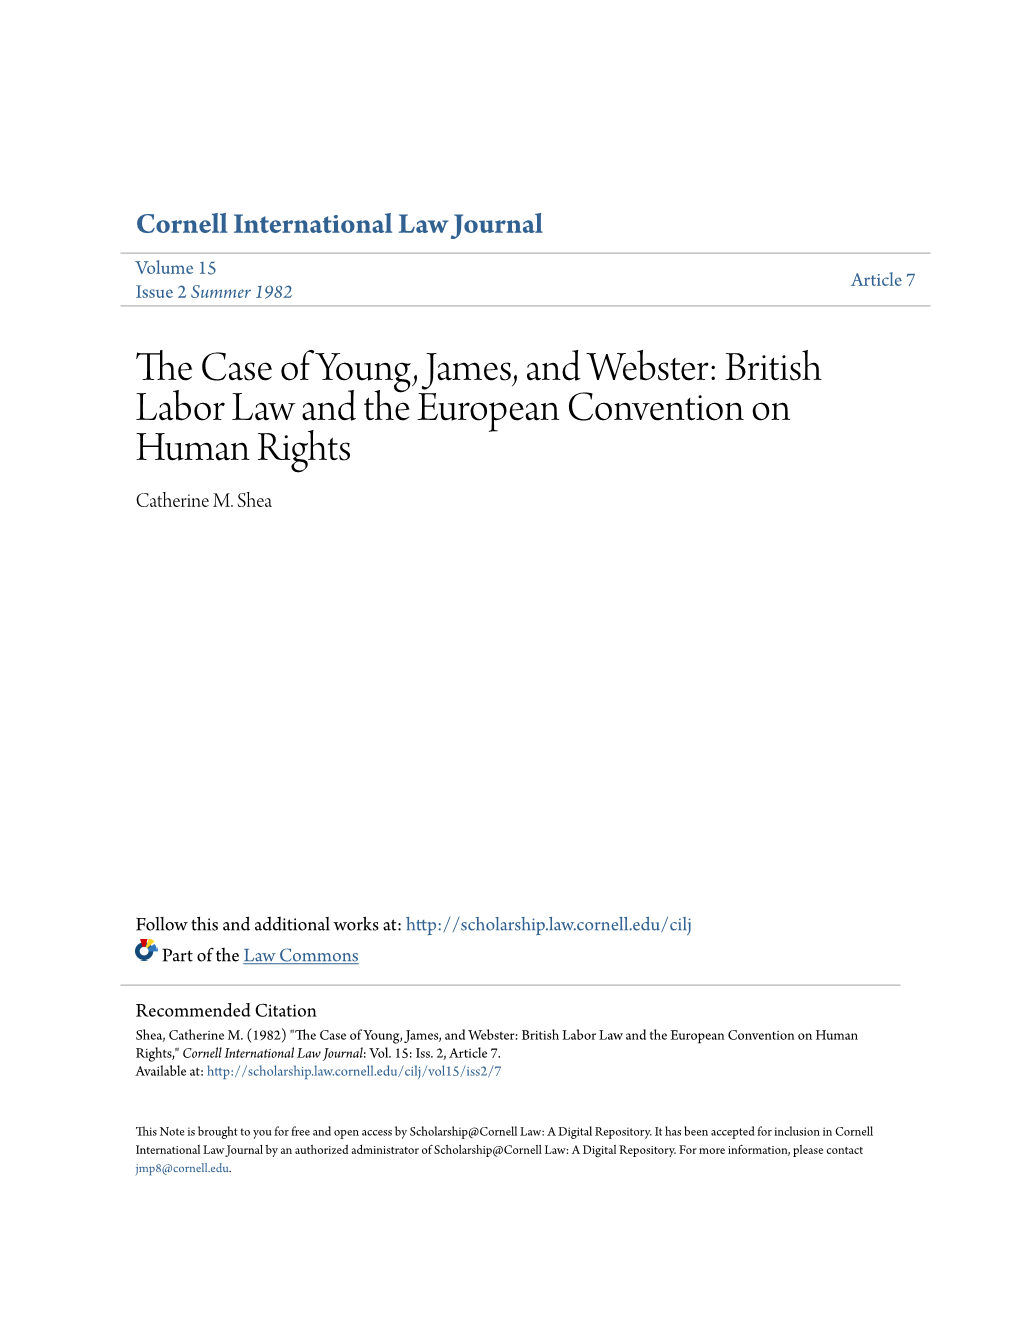 The Case of Young, James, and Webster: British Labor Law